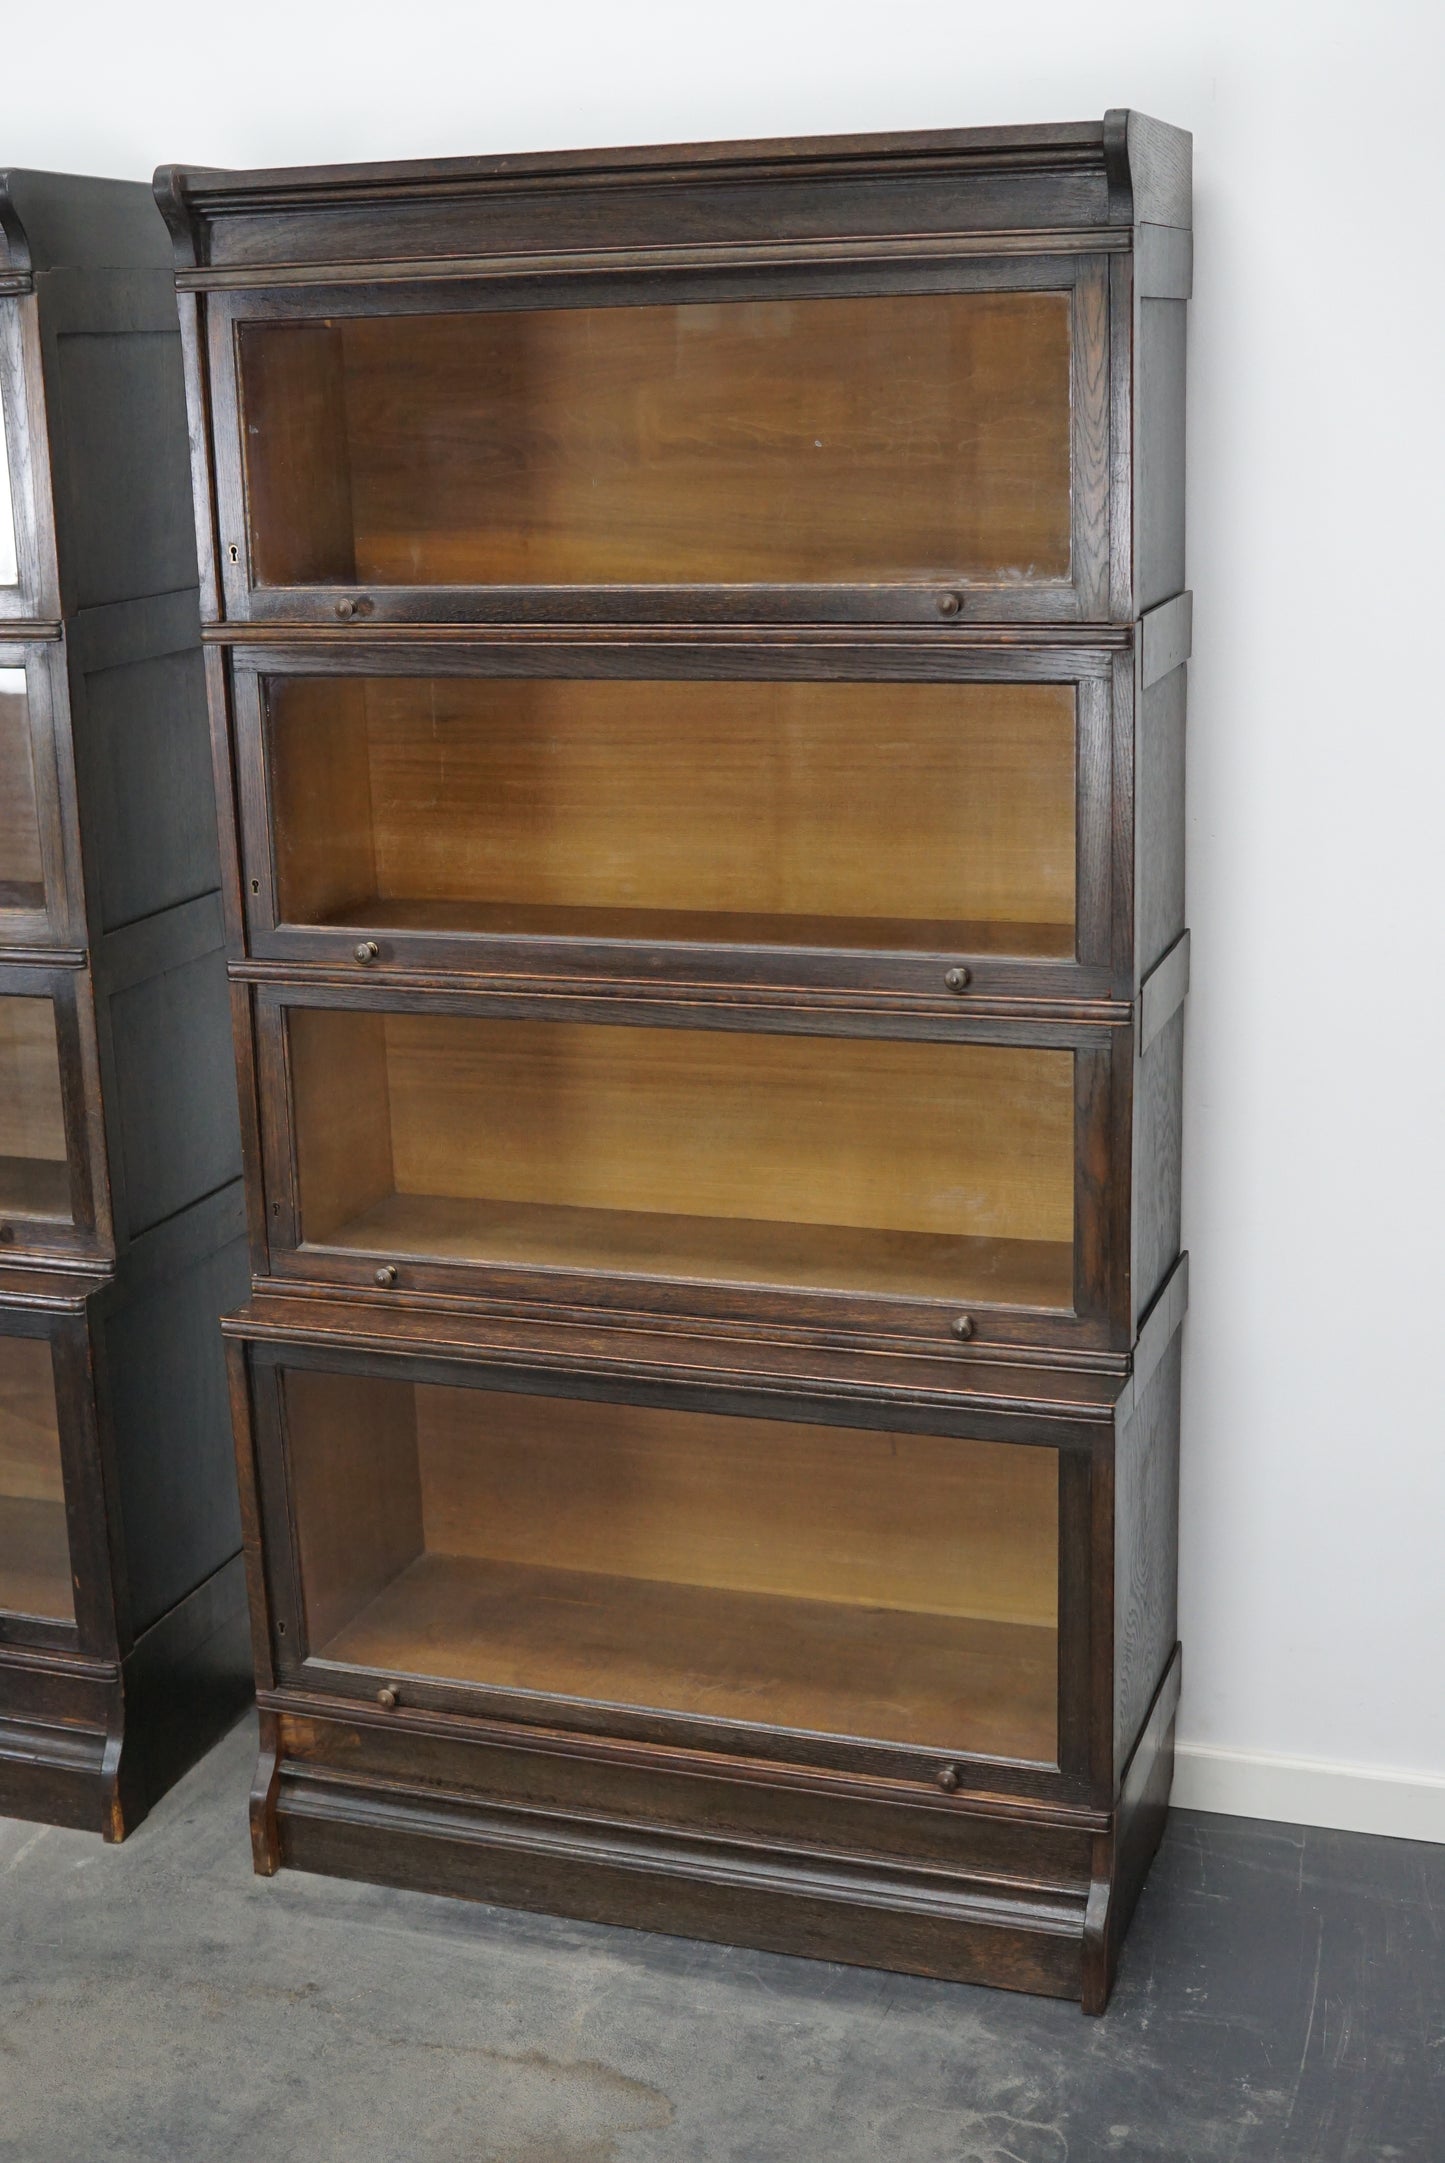 Pair of Antique Oak Stacking Bookcases by Muller in Globe Wernicke Style ca 1930